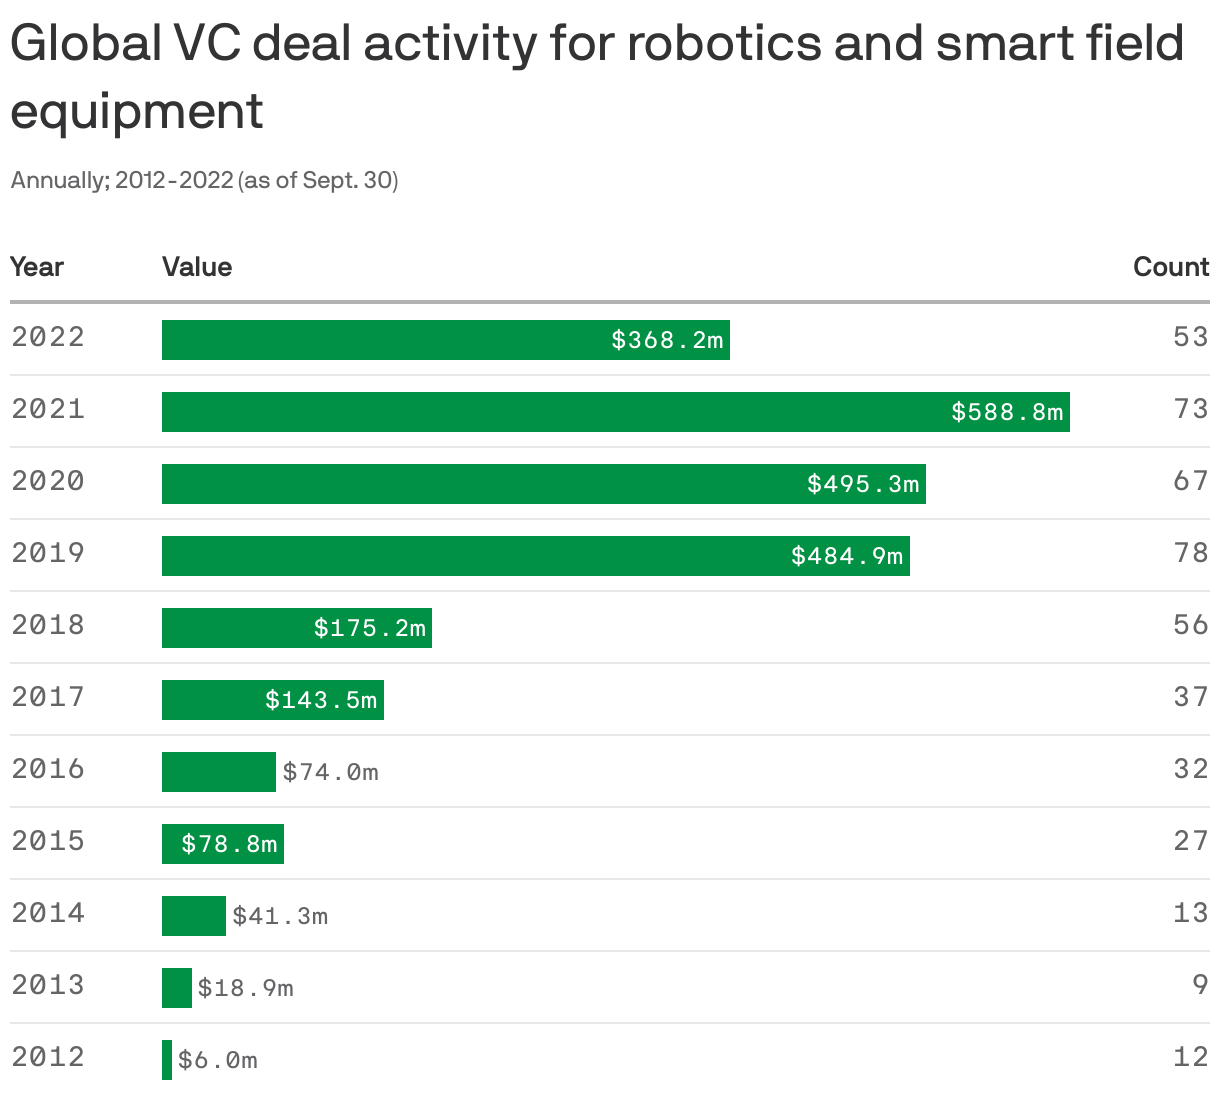 Global VC deal activity for robotics and smart field equipment